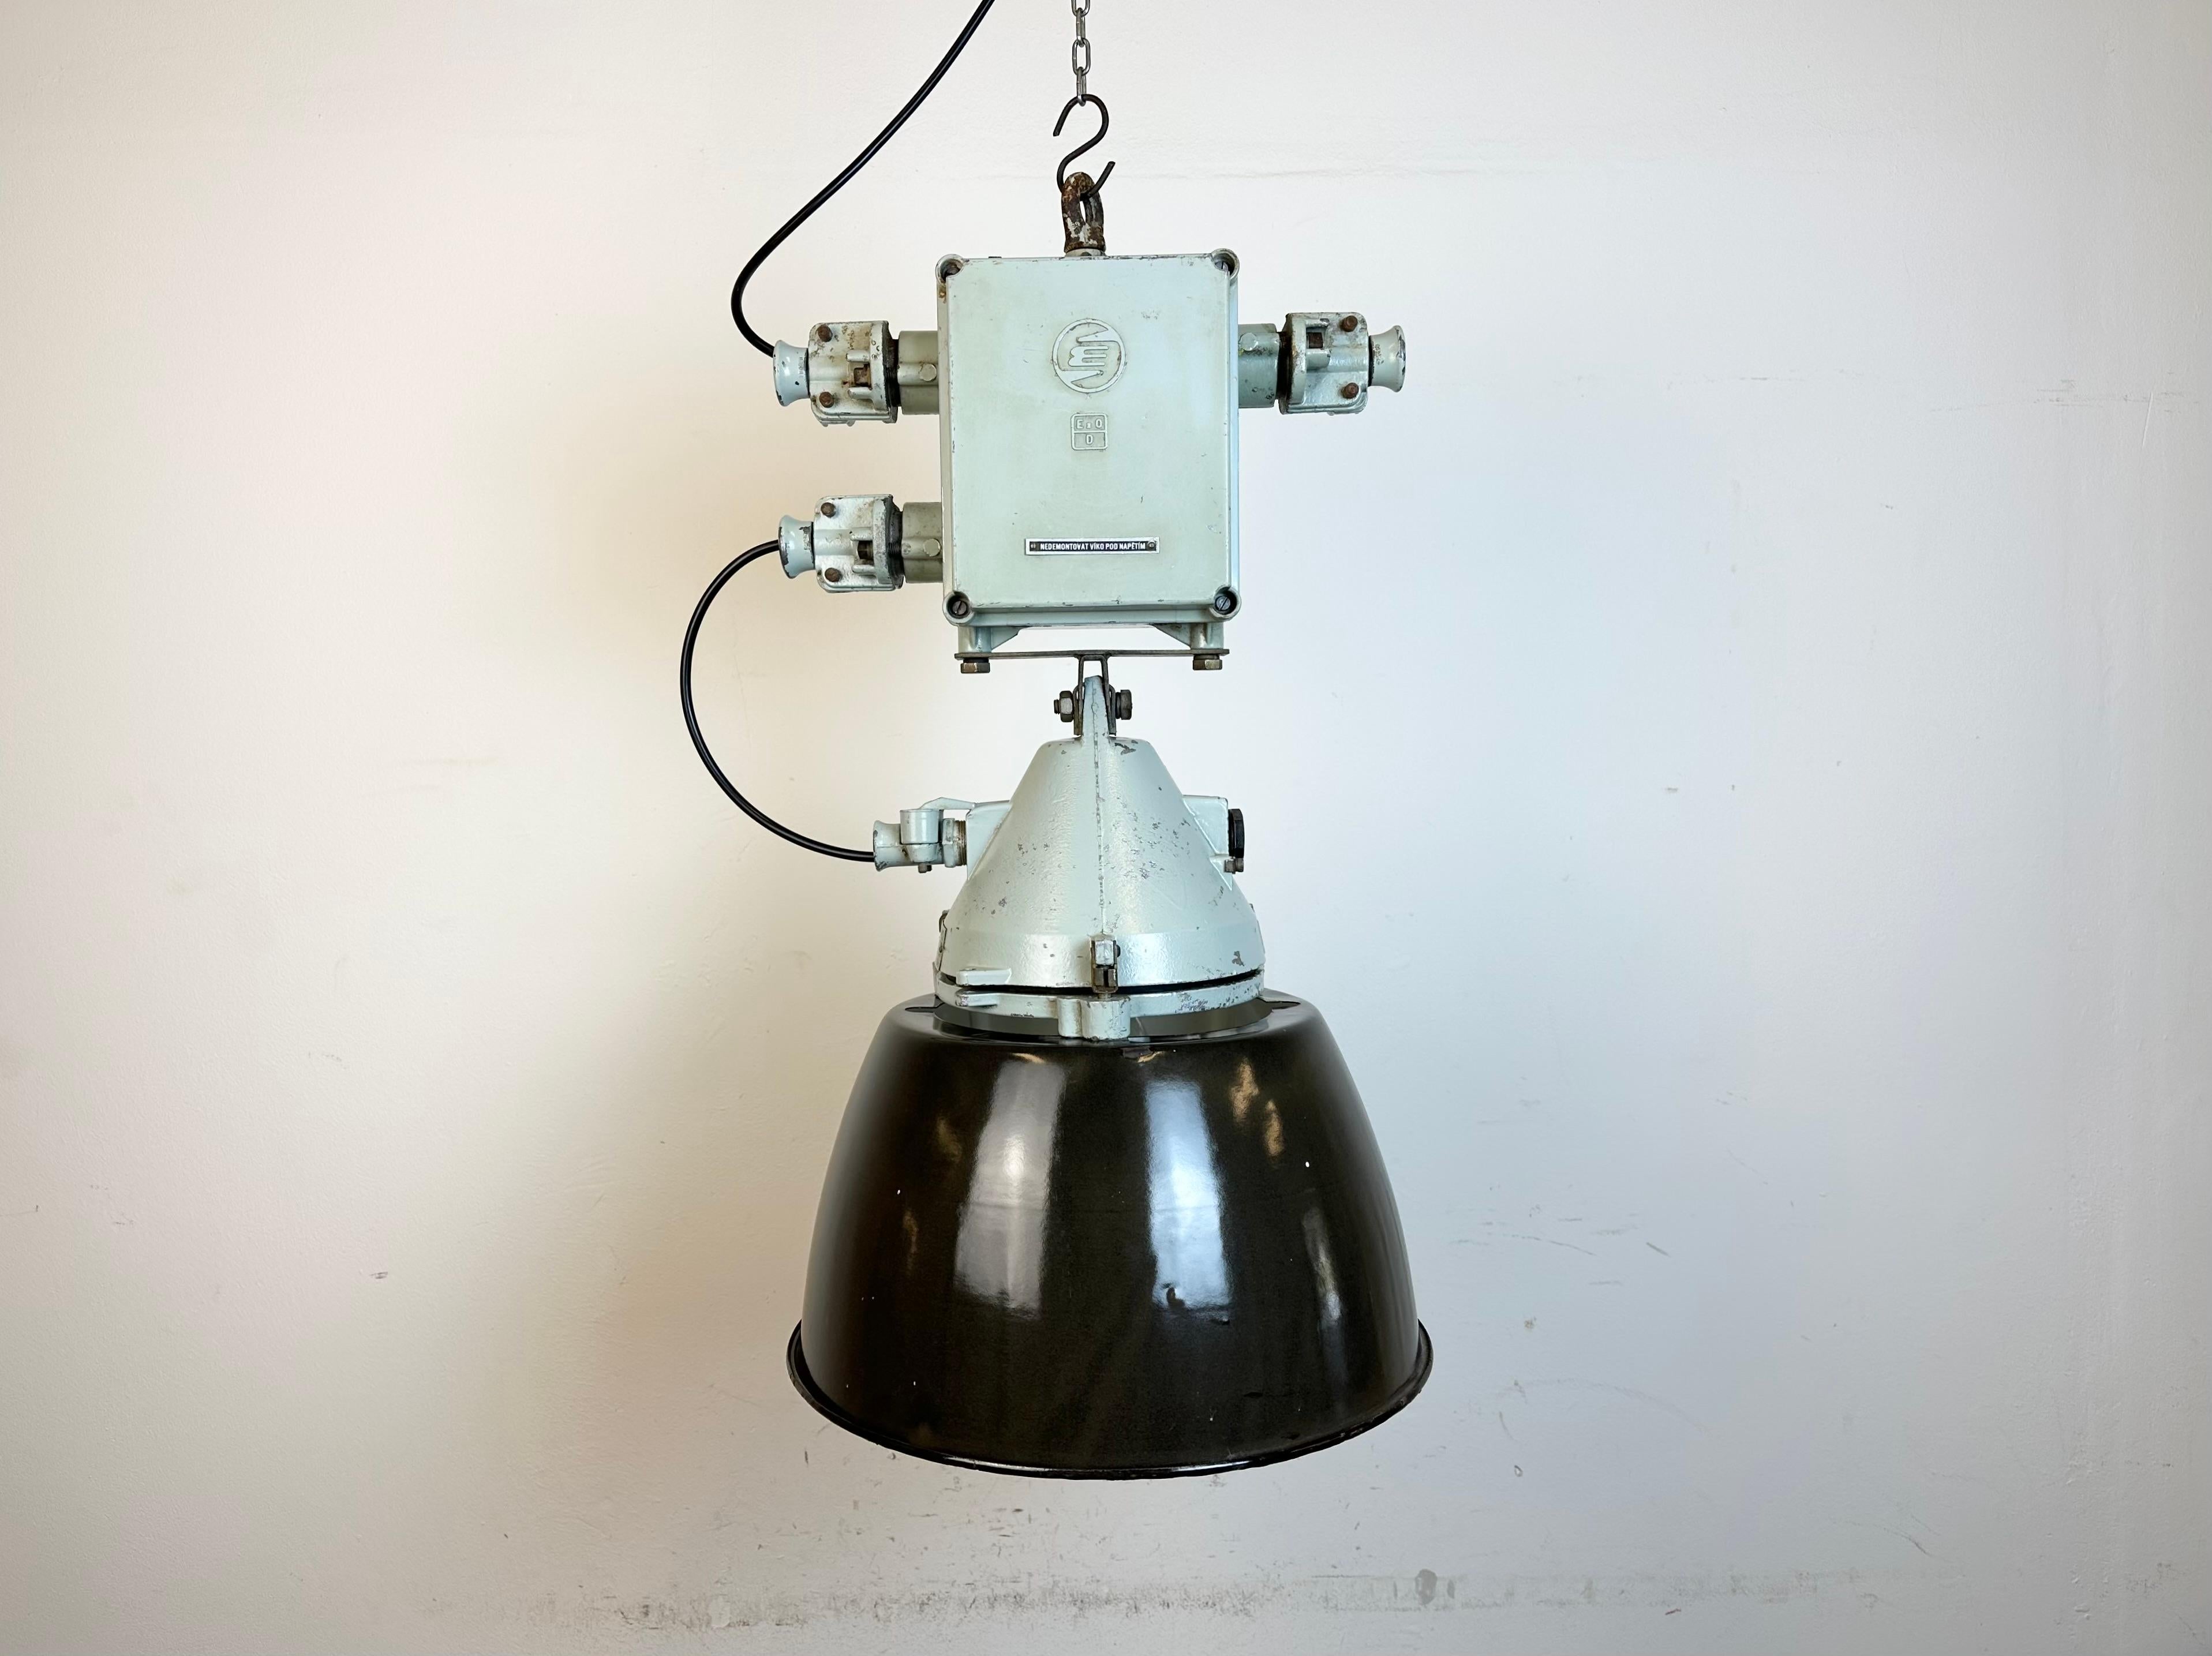 Grey industrial lamp with massive protective glass bulb made by Elektrosvit in former Czechoslovakia during the 1970s.It features a grey cast aluminium body, a clear glass and a black enameled shade with white interior. Porcelain socket requires